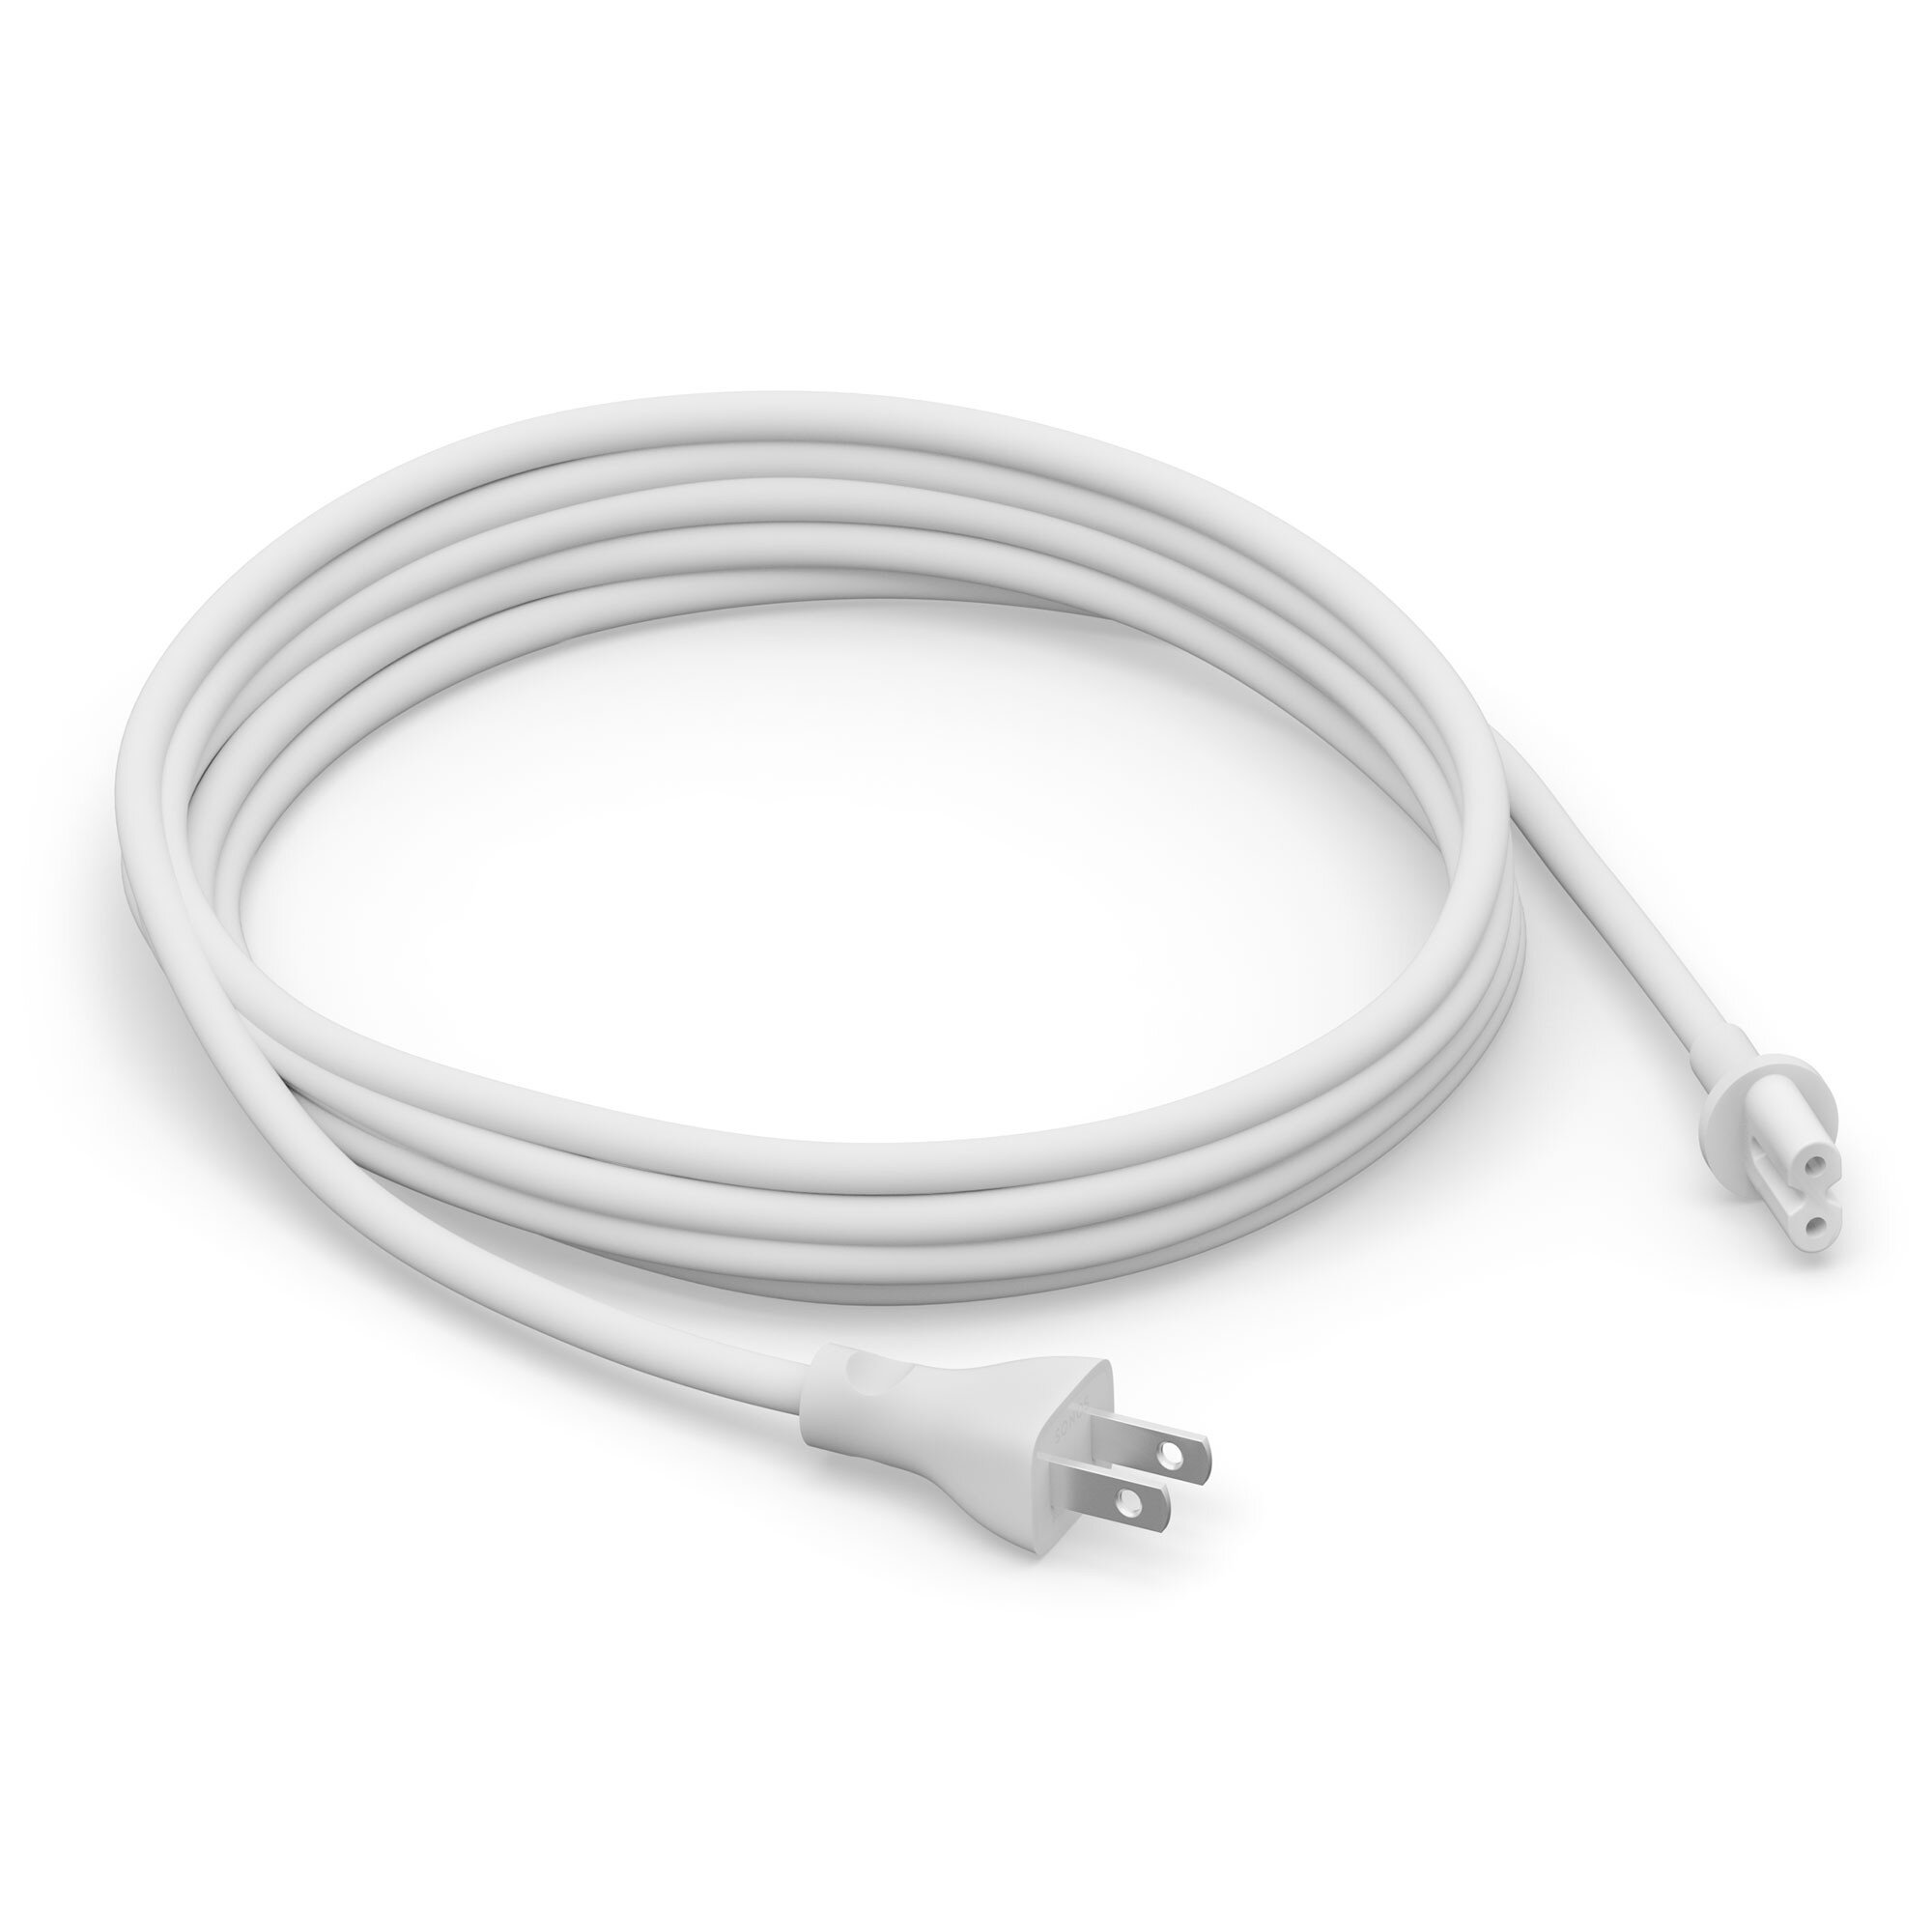 Buy Sonos Power Cable I - 11.5ft - White online Worldwide Tejar.com